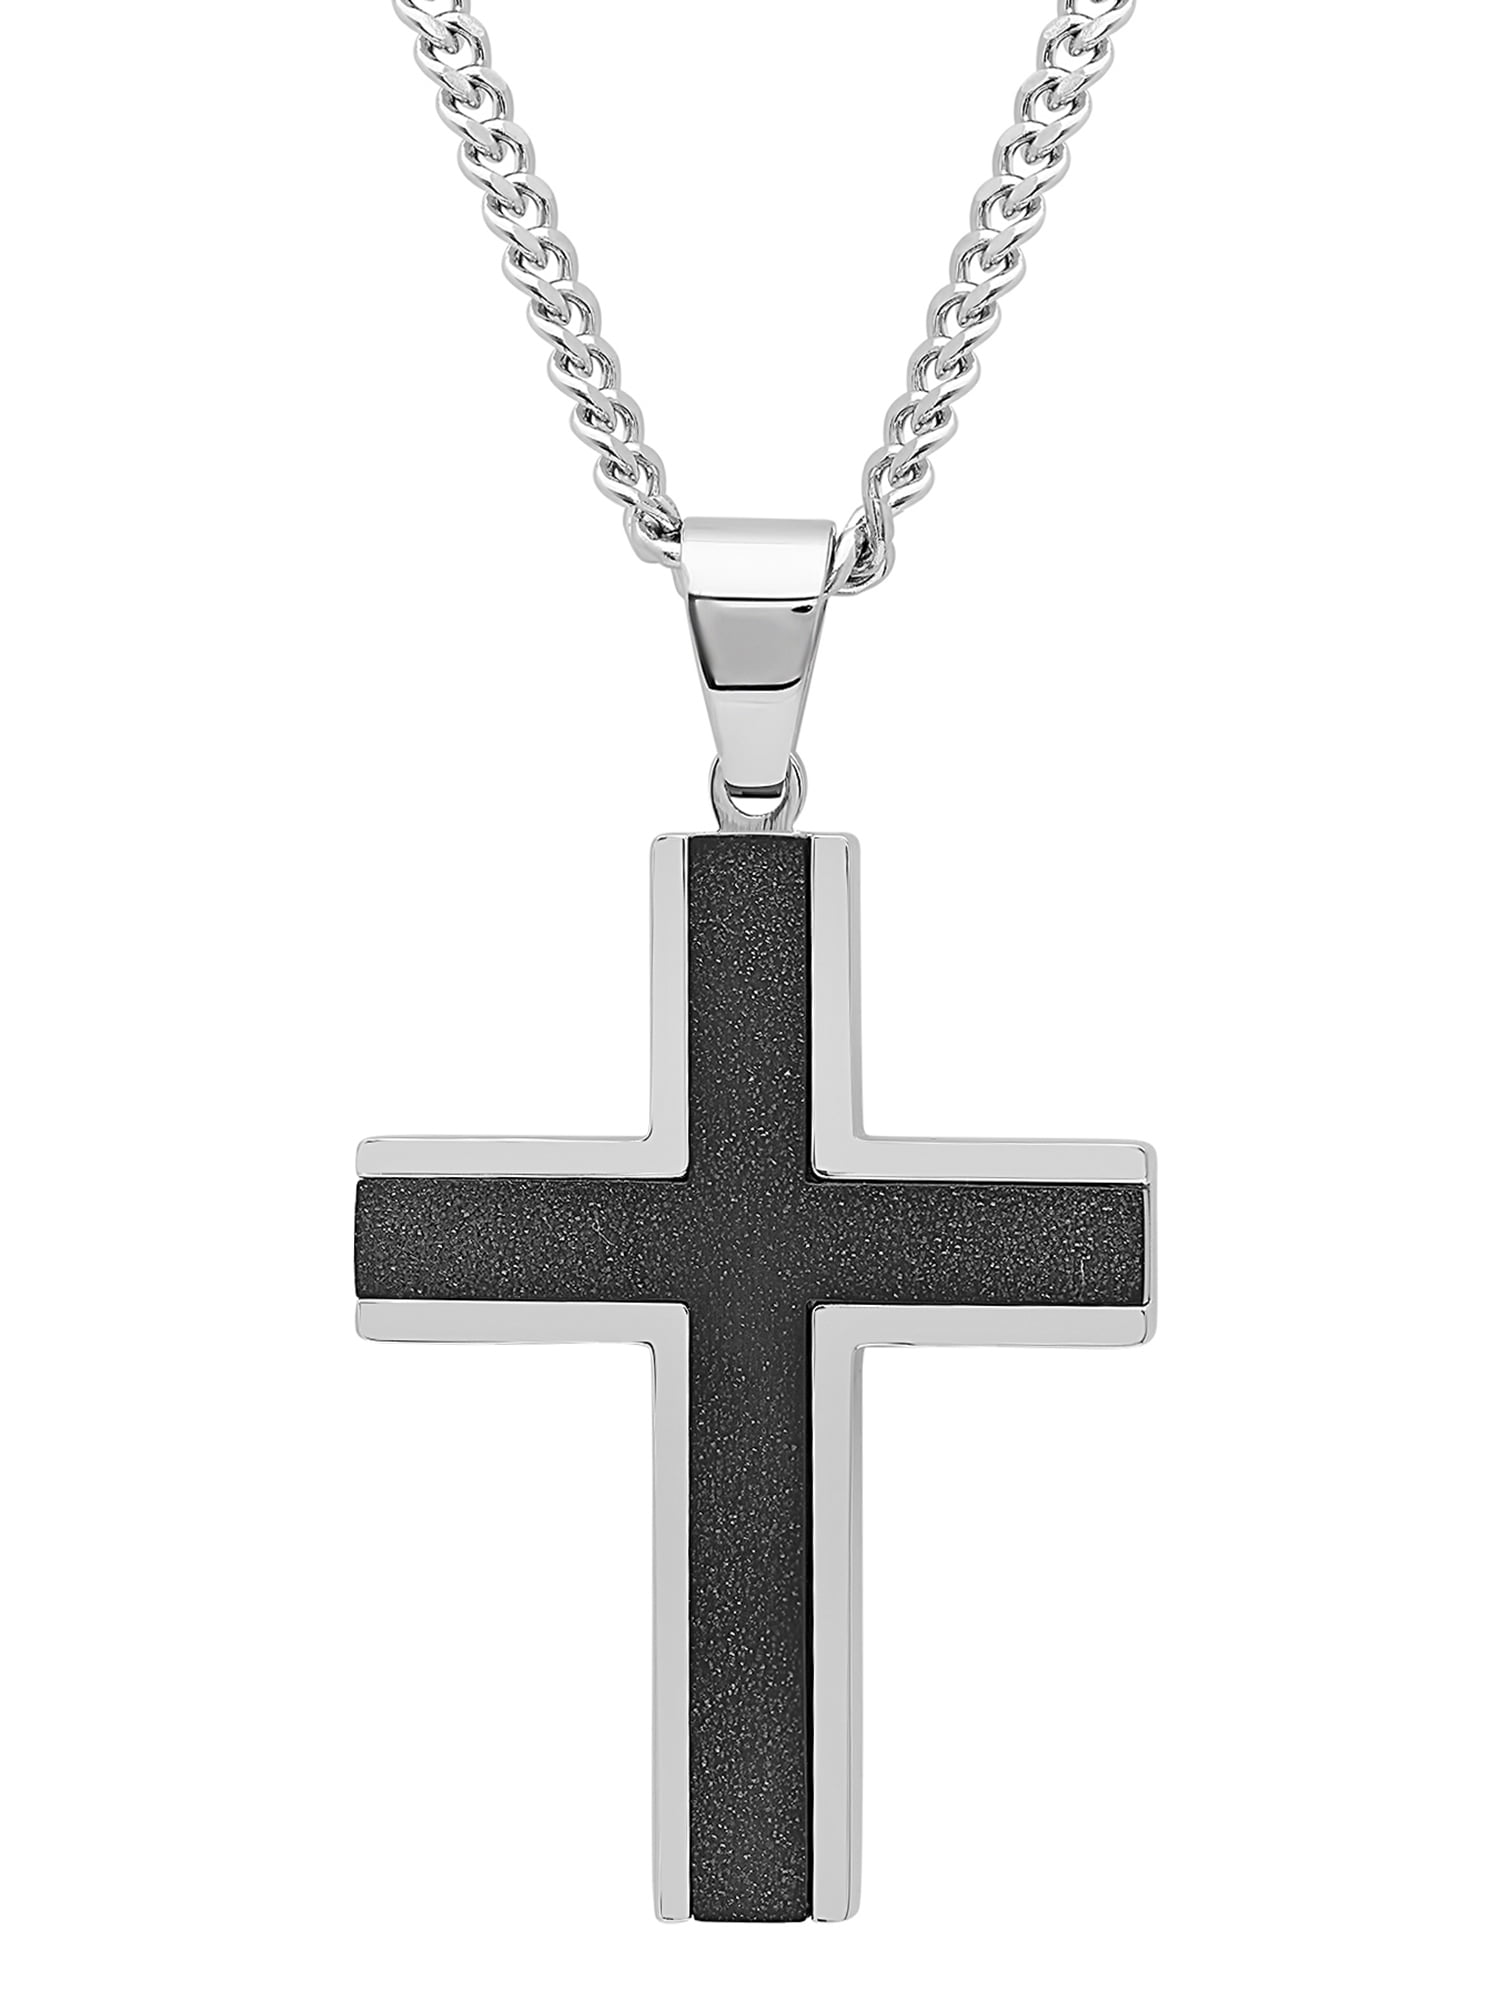 Cross Leather Necklace for Men Women Pendant Necklaces Fashion Jewelry Textured 